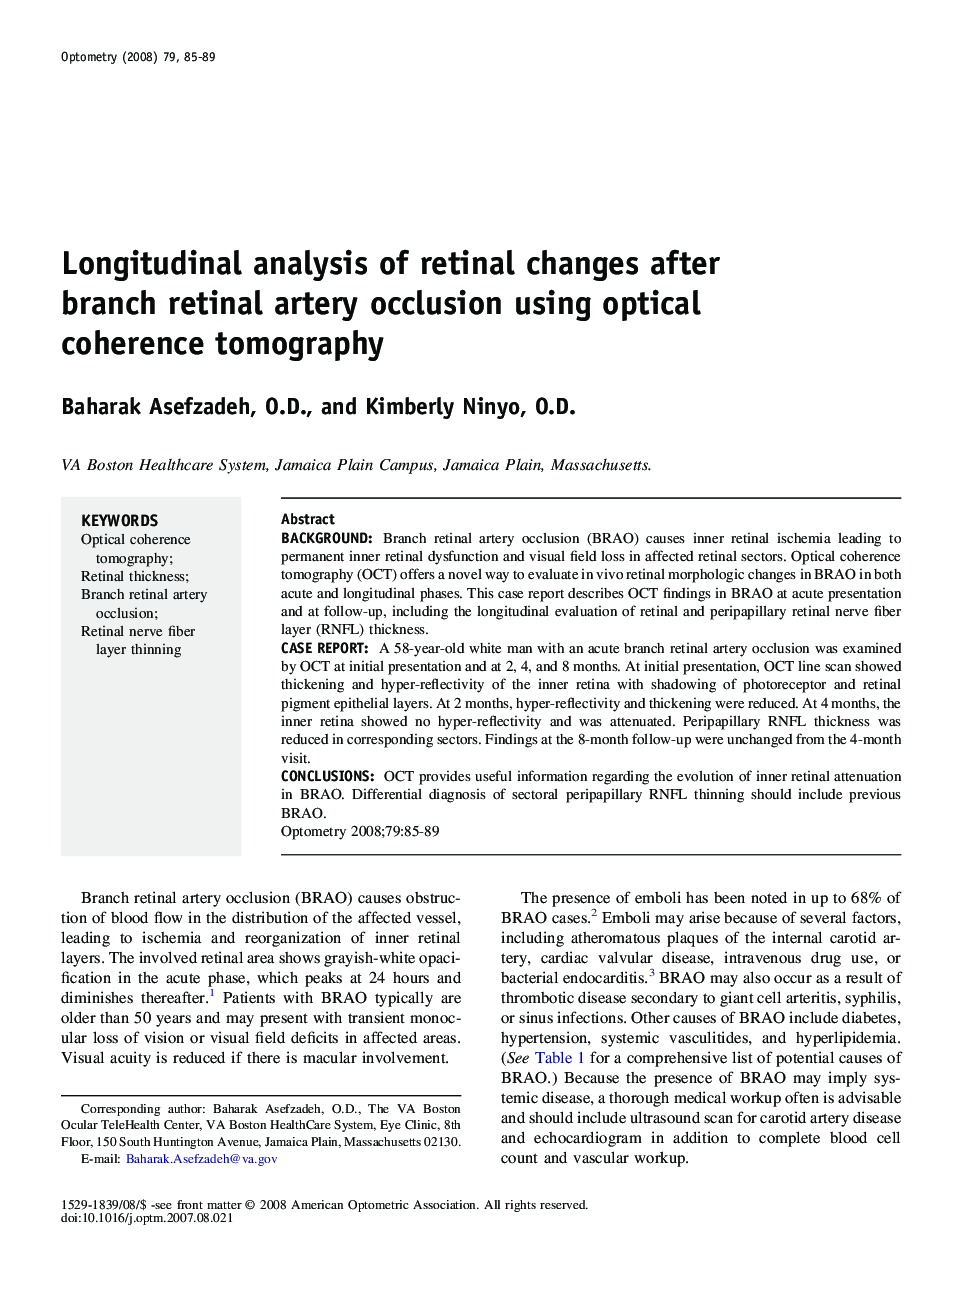 Longitudinal analysis of retinal changes after branch retinal artery occlusion using optical coherence tomography